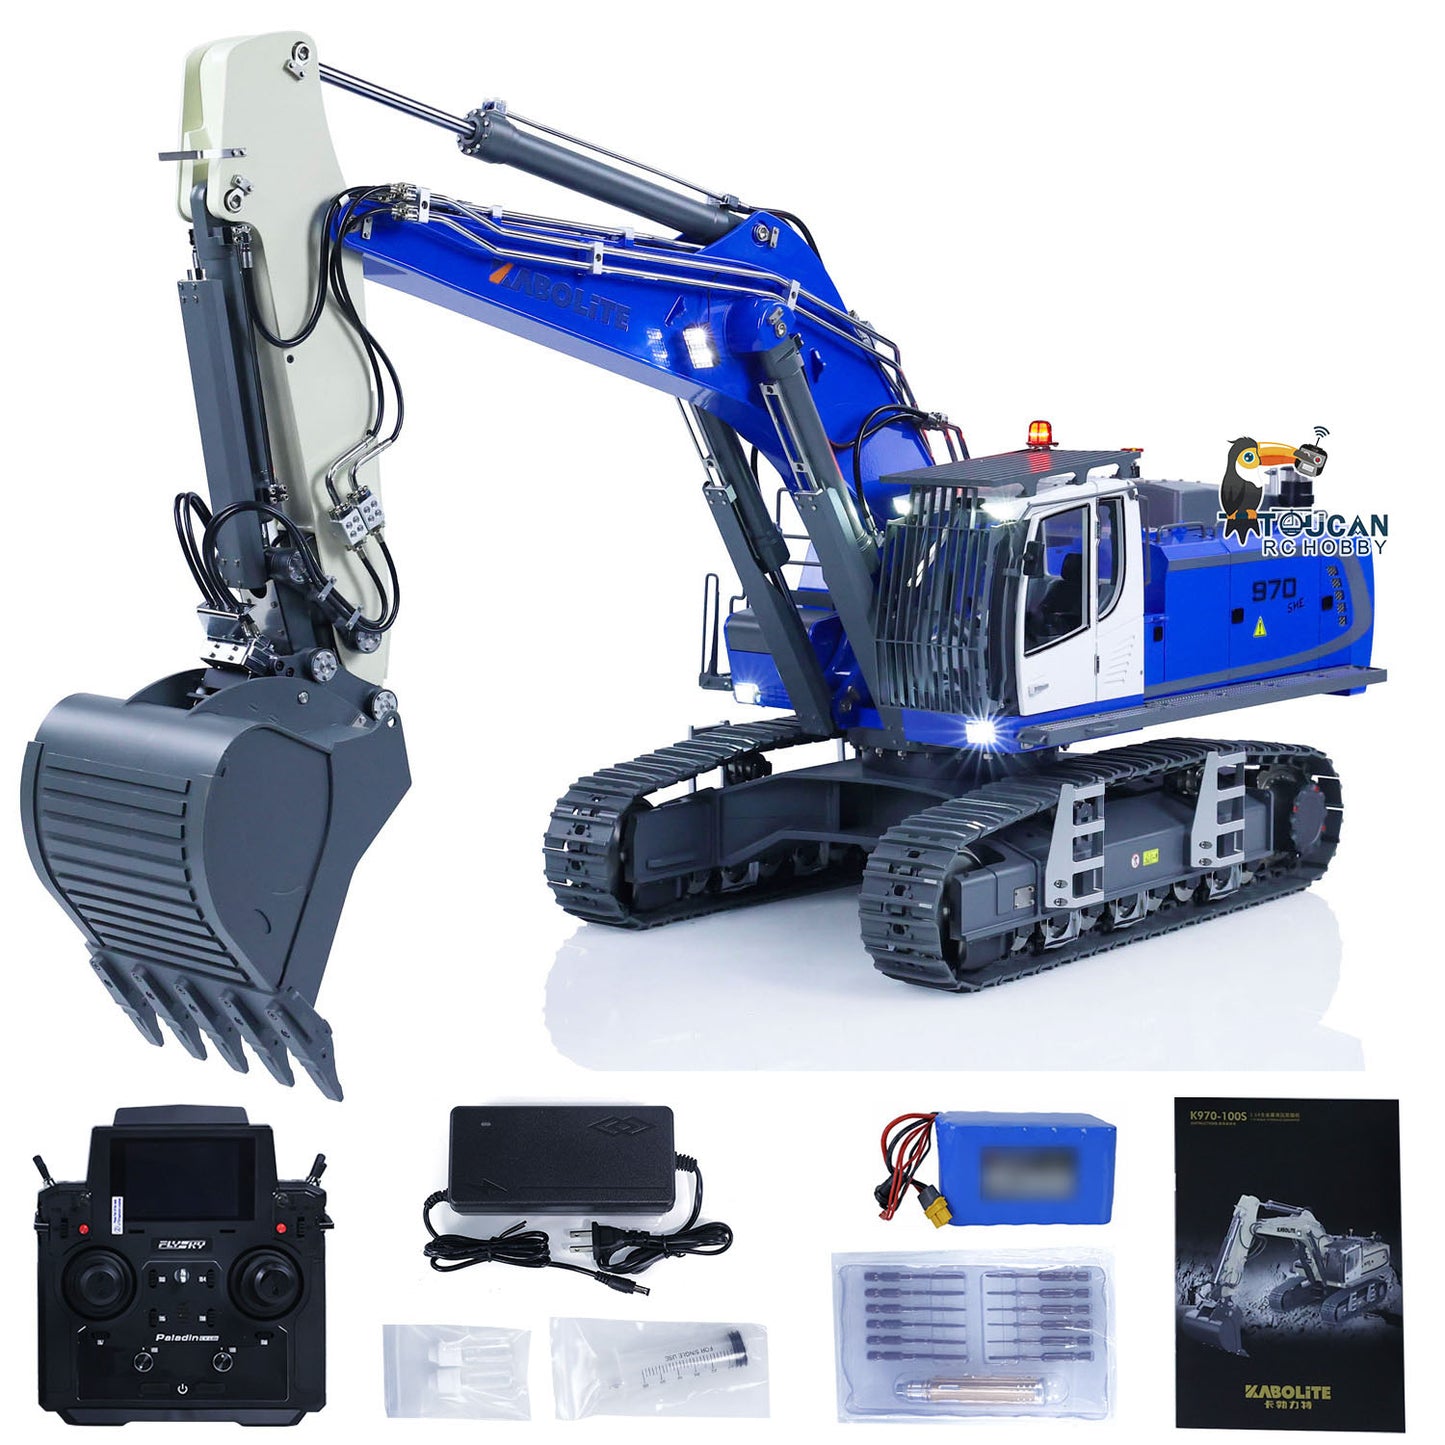 IN STOCK Kabolite K970 100S Pro 1/14 Hydraulic RC Excavator Metal Remote Control Construction Vehicle Painted Assembled Simulation Model